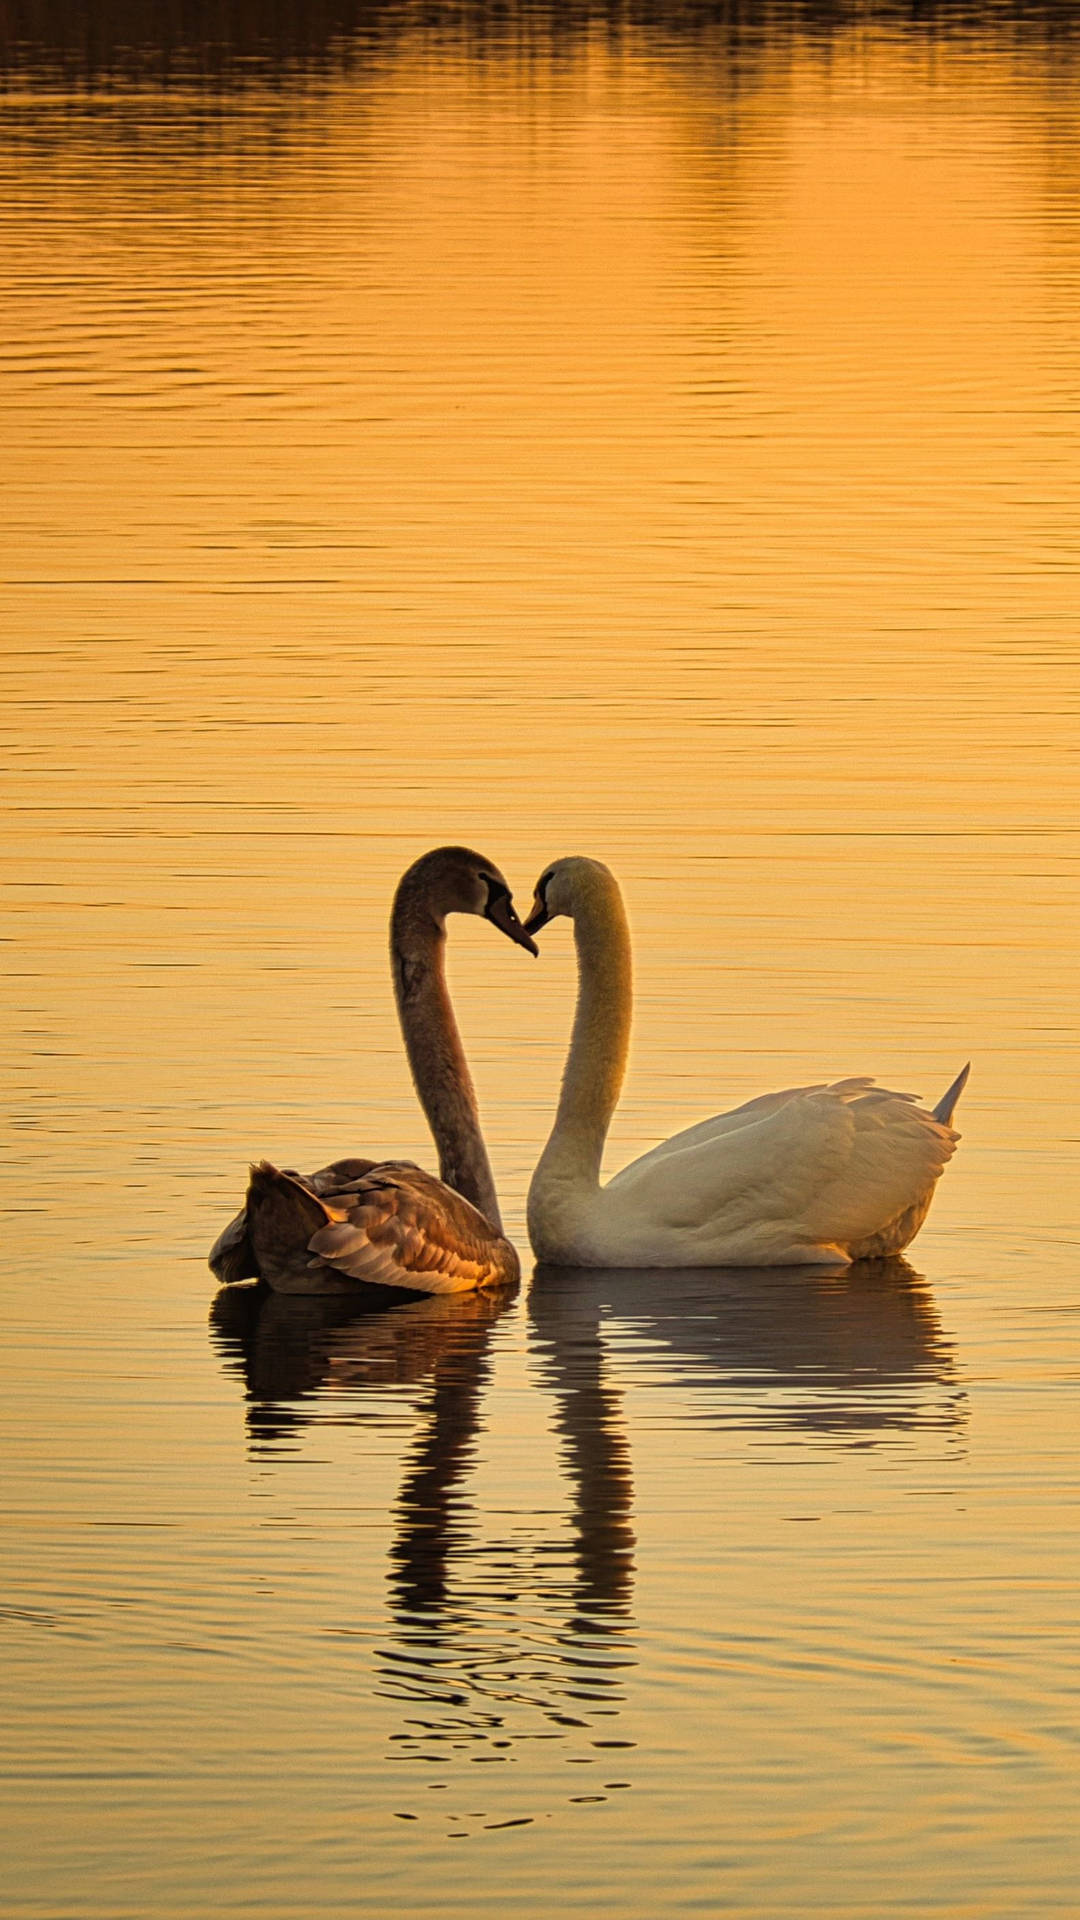 Swans Love Nature During Sunset Wallpaper